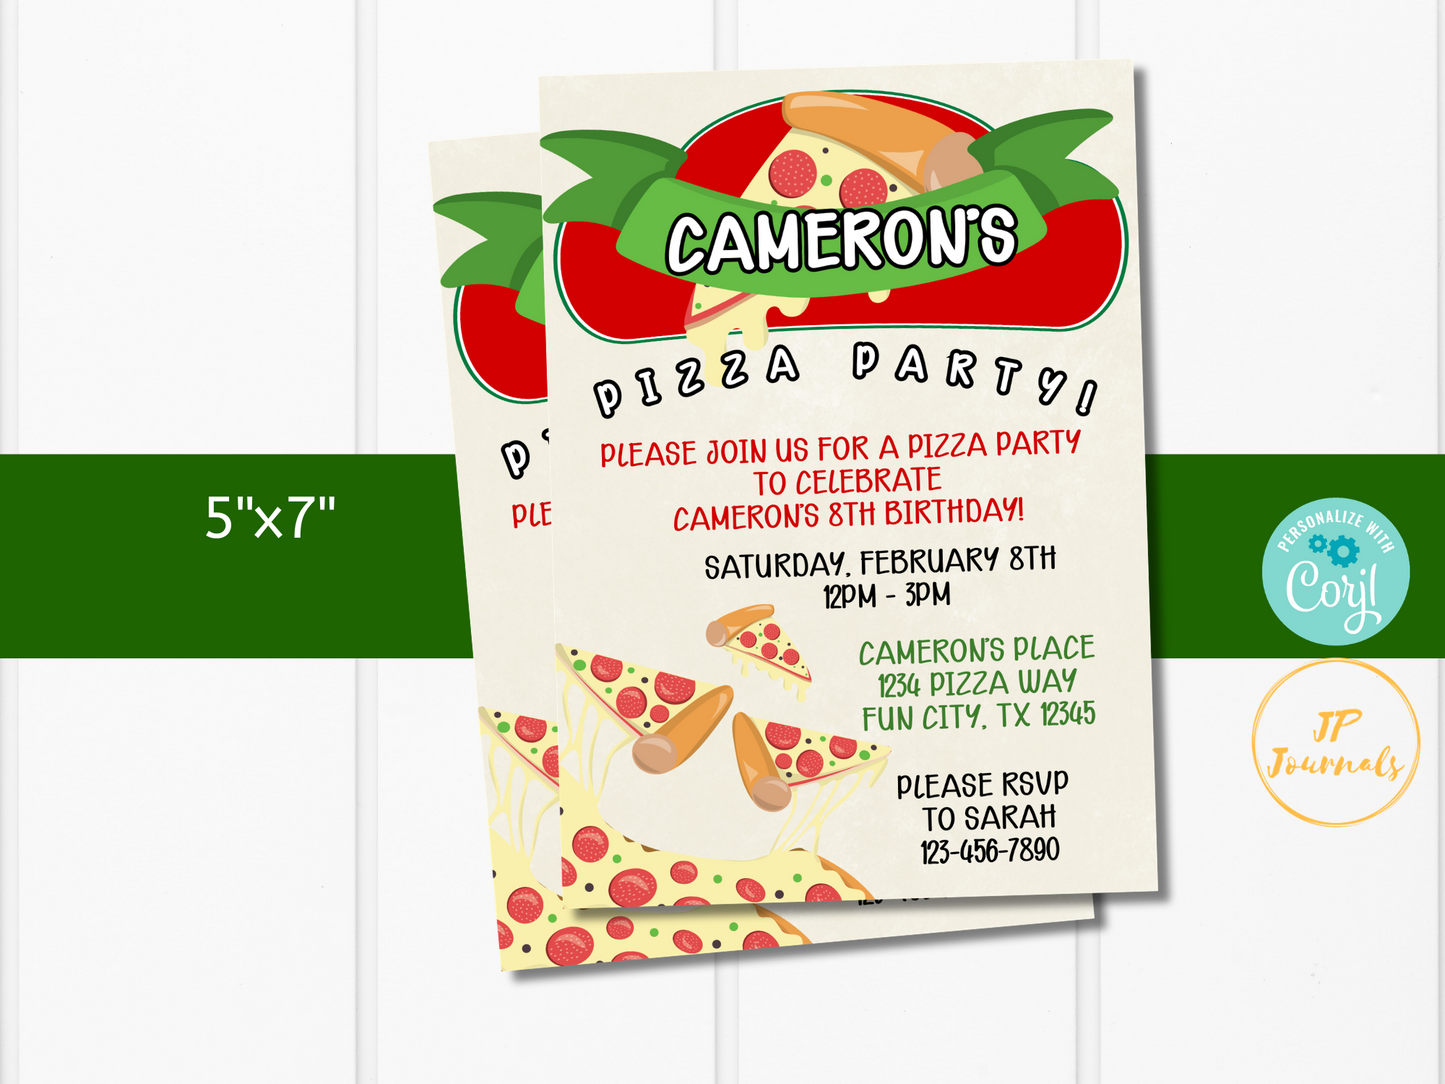 Editable Printable Pizza Party Invitation Template - Pizza Birthday Party Invite - Edit and Print - Pizza Parlor Green Red